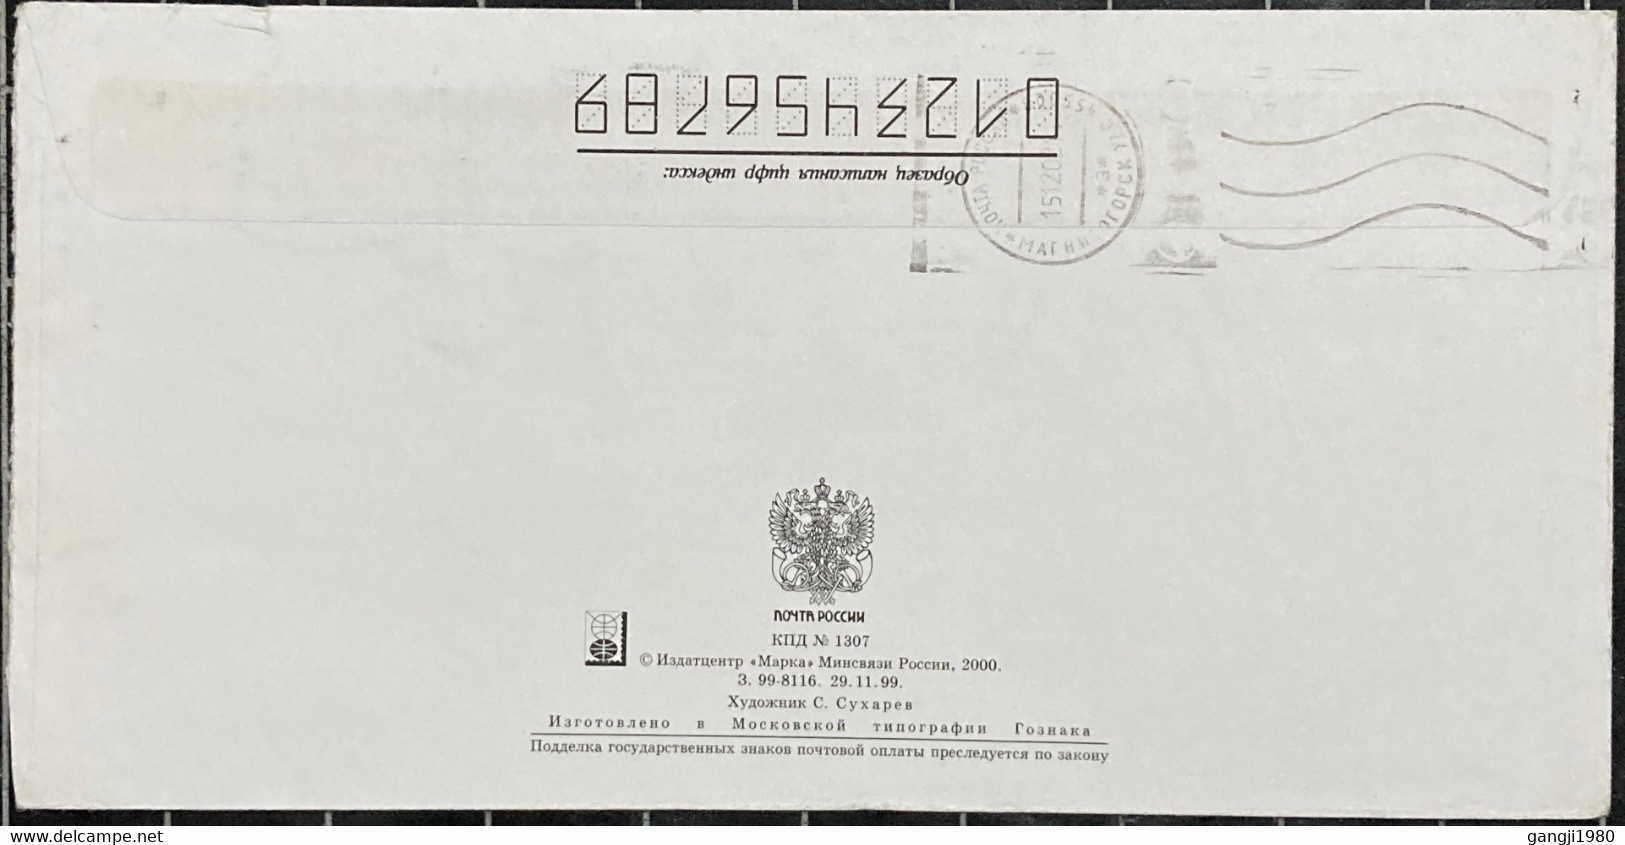 RUSSIA 2002, STATIONERY COVER USED TO GERMANY,RETURN TO SENDER LABEL,RAILWAY, BUILDING, MAGNITOGORSK TOWN CANCEL - Covers & Documents